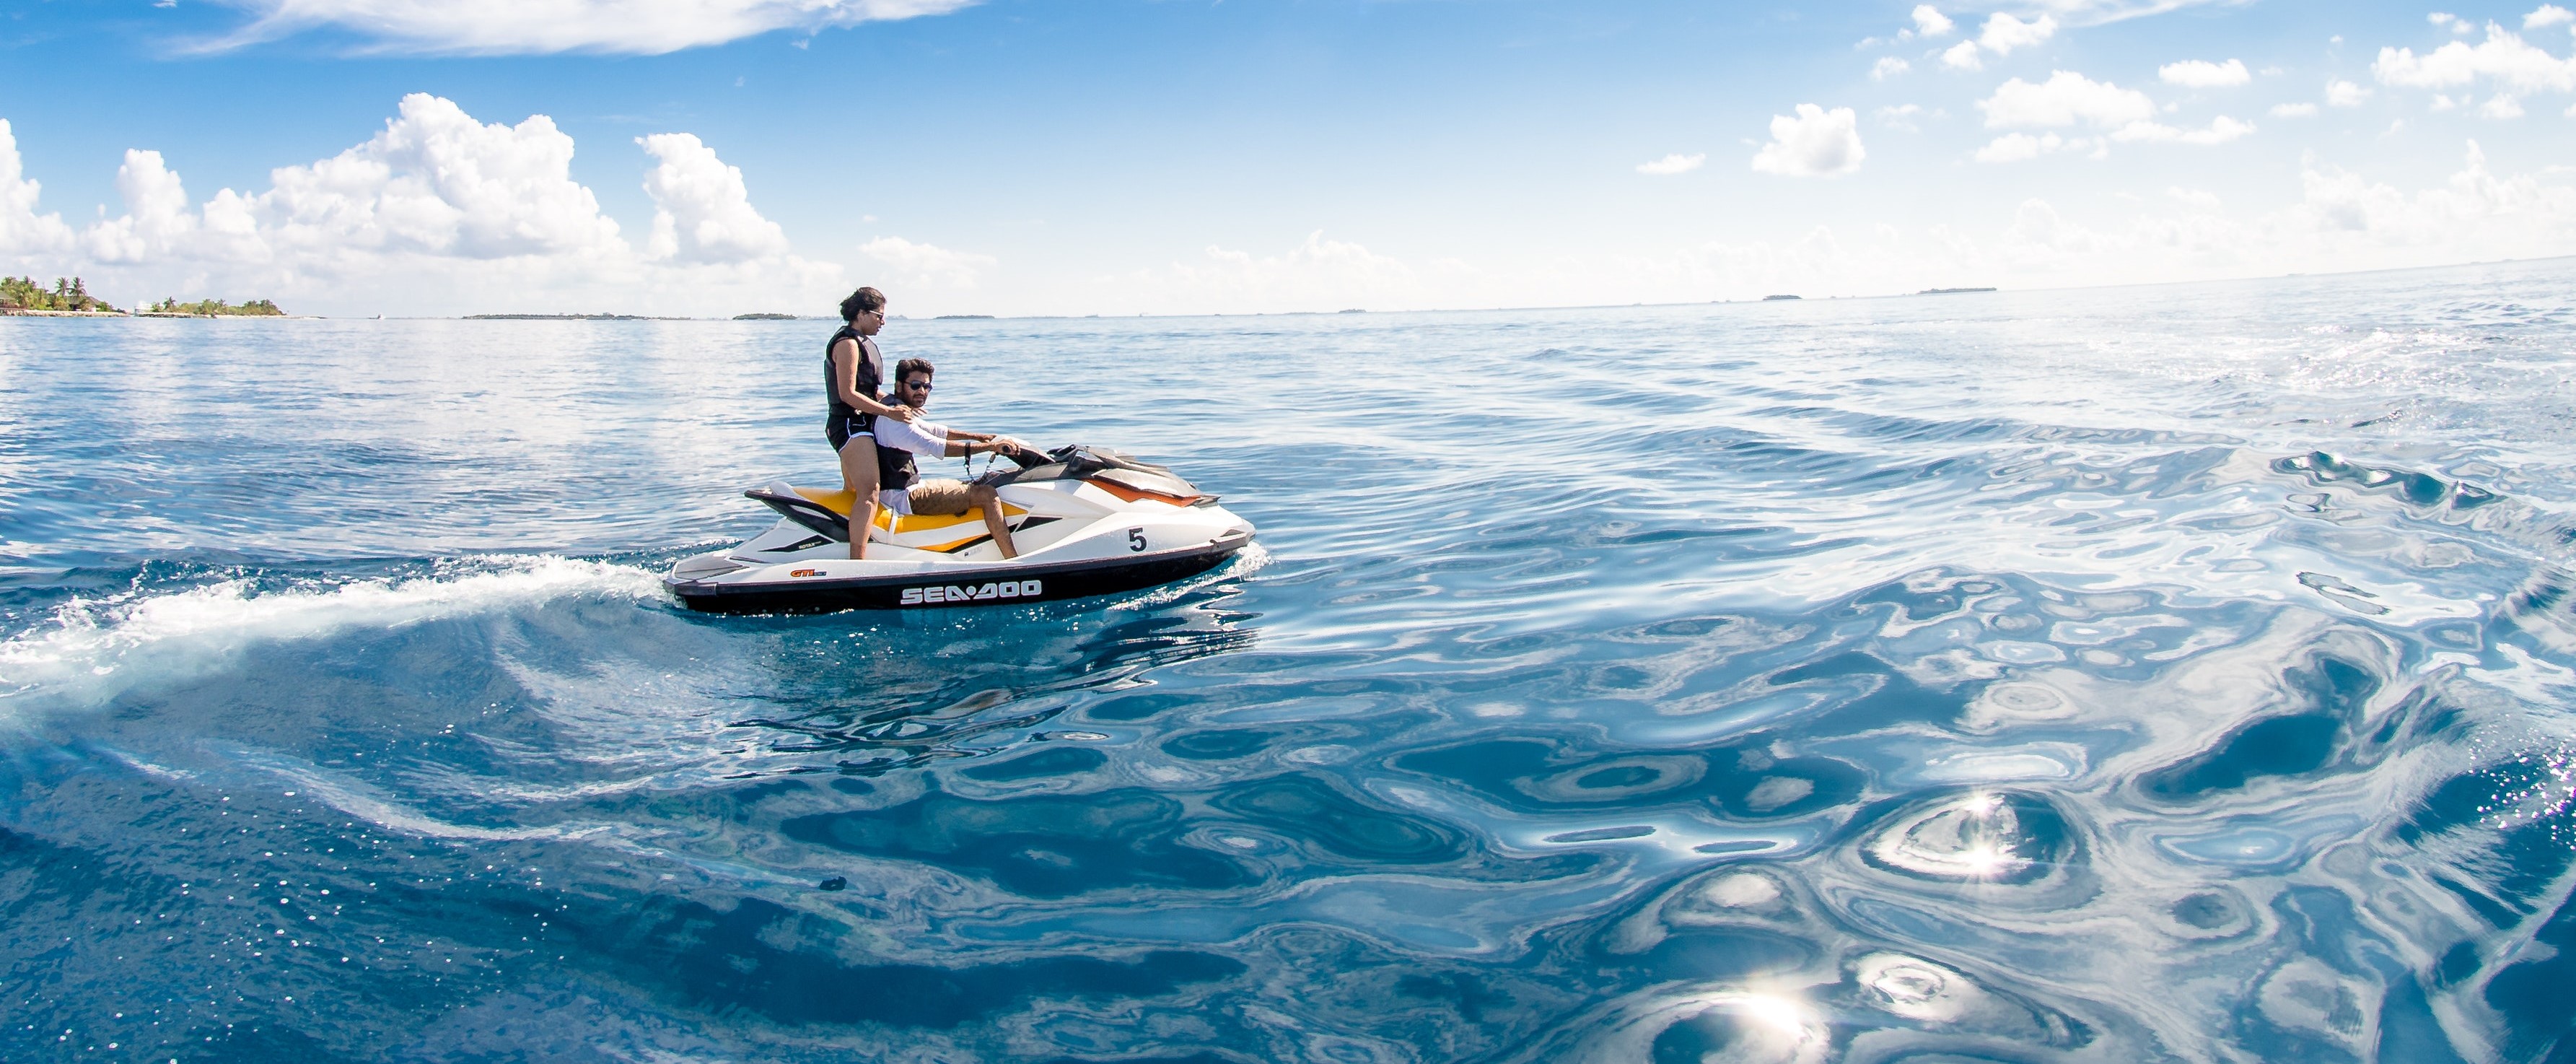 Jet Skiing | Lifestyle | Boaters' Bucket List - 22 Experiences & Activities | Marinalife